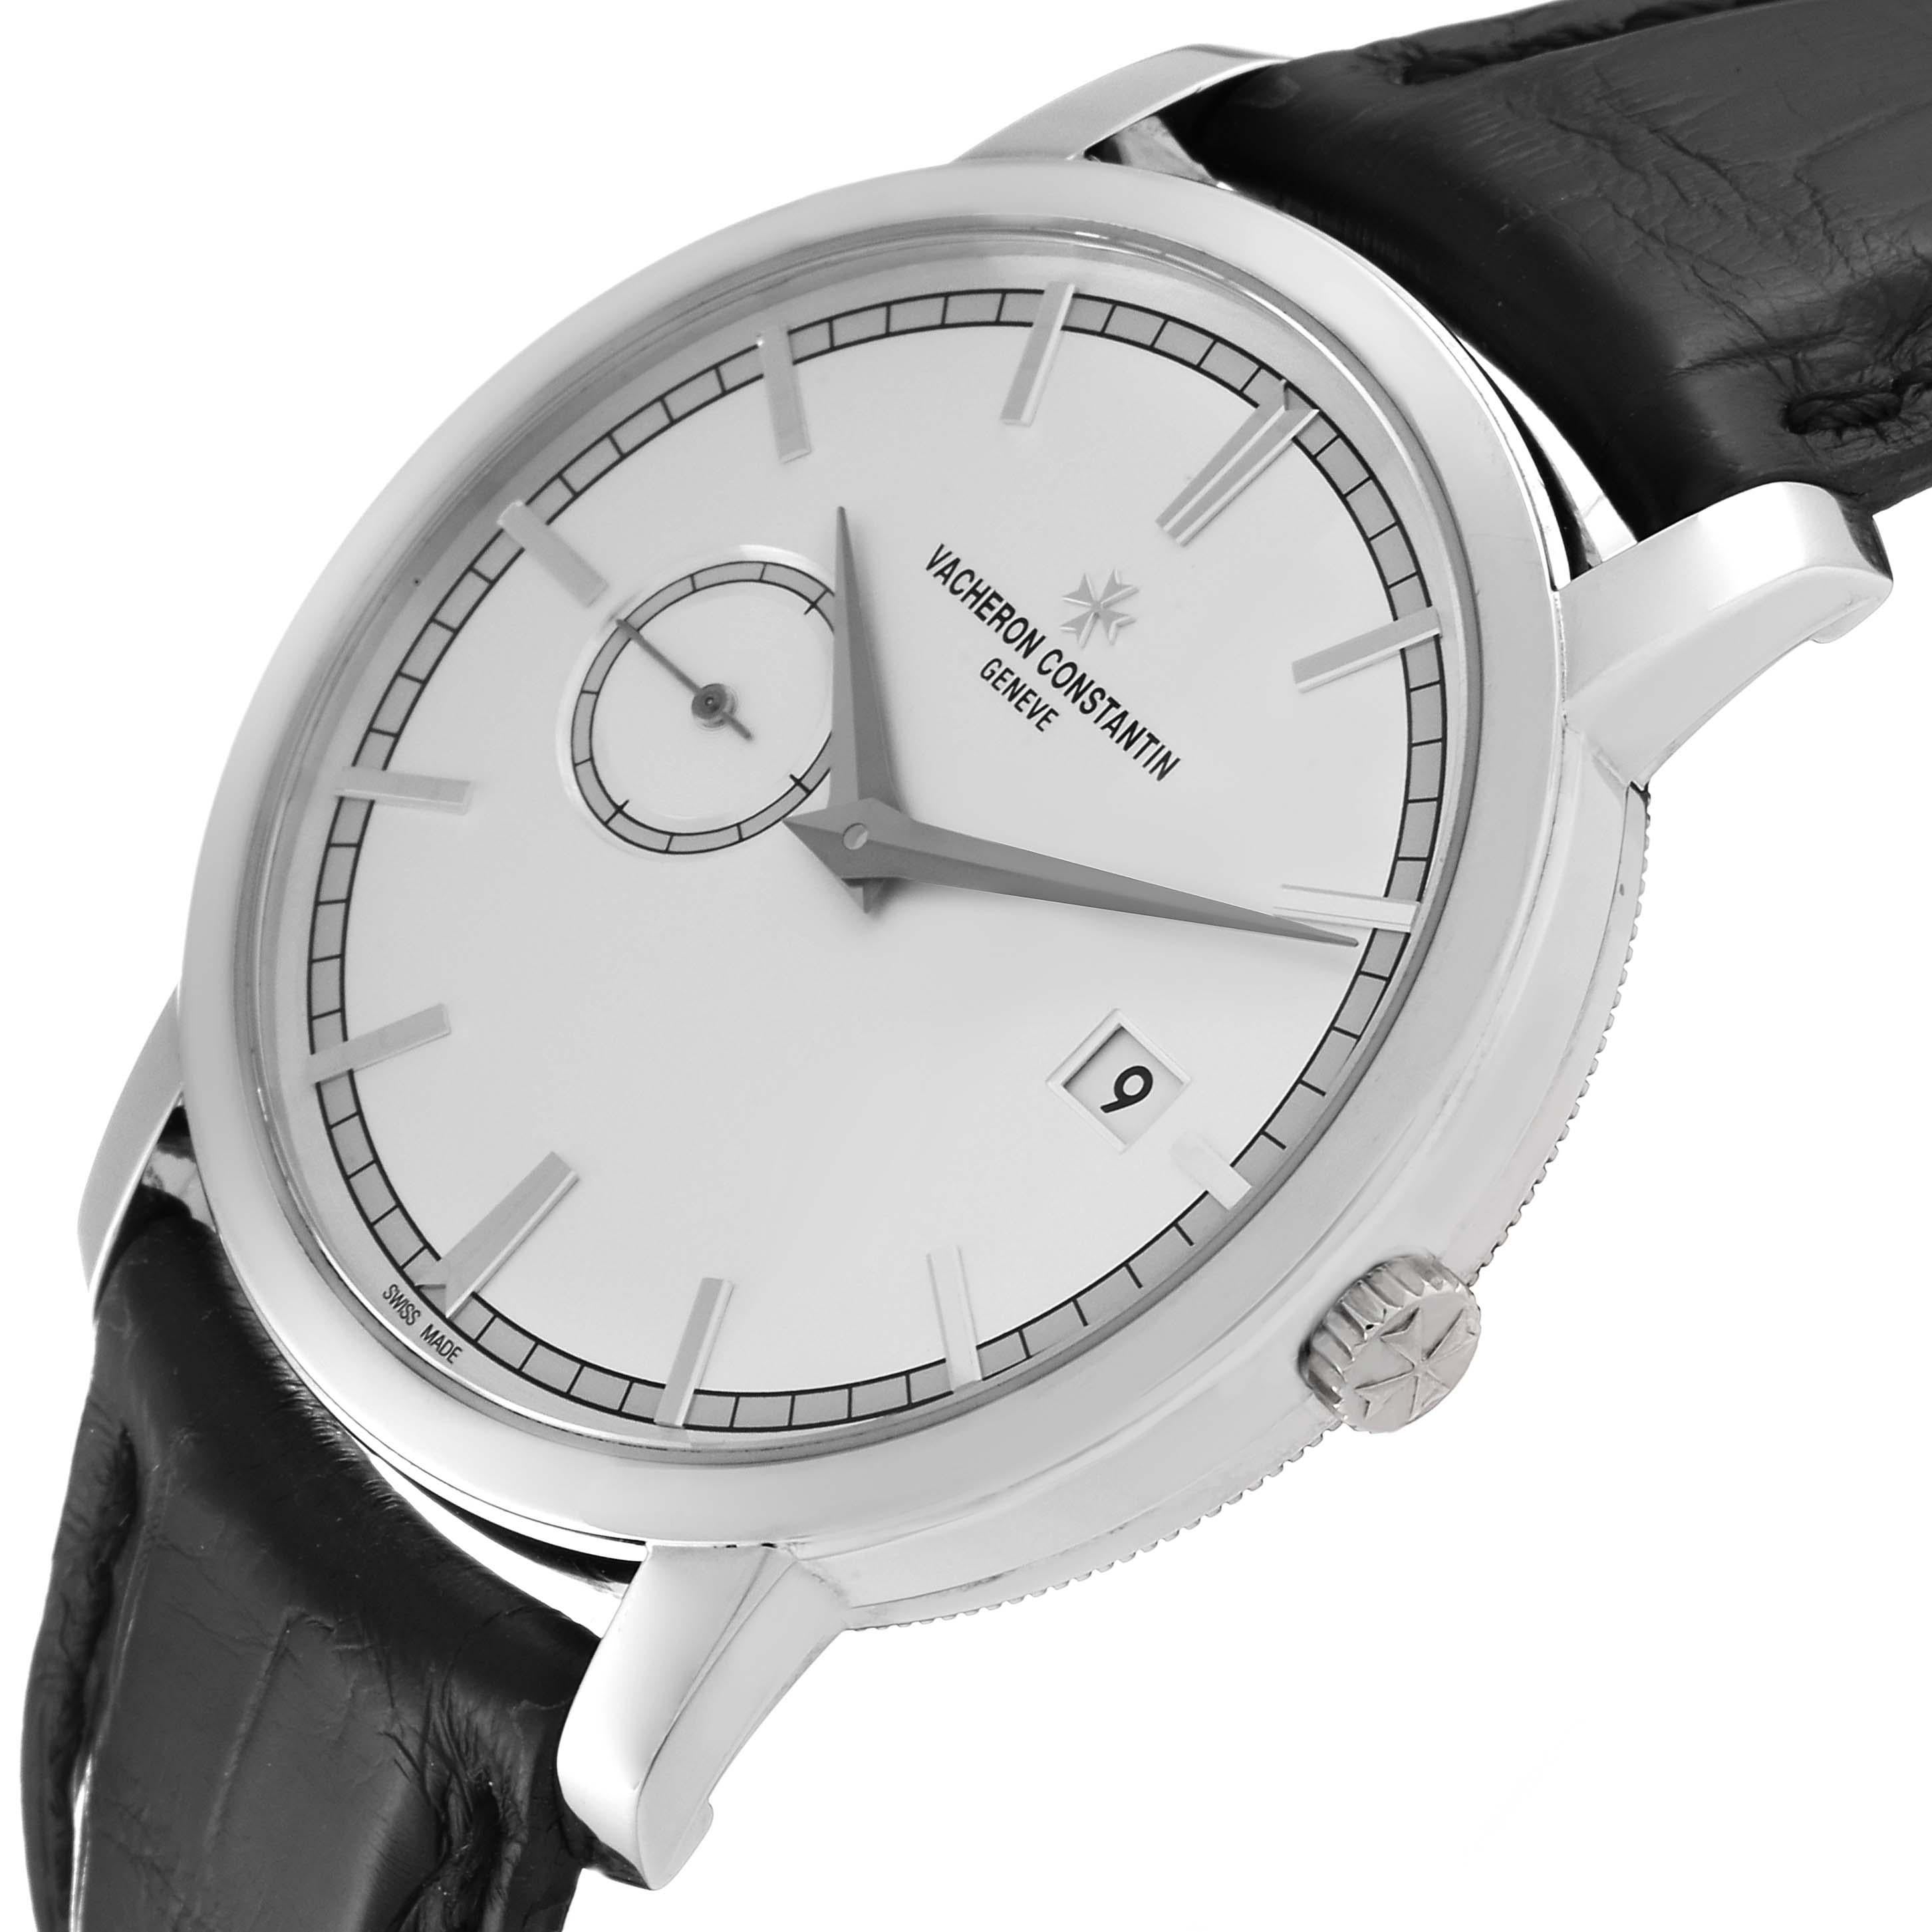 Vacheron Constantin Traditionnelle White Gold Mens Watch 87172 Box Papers 1